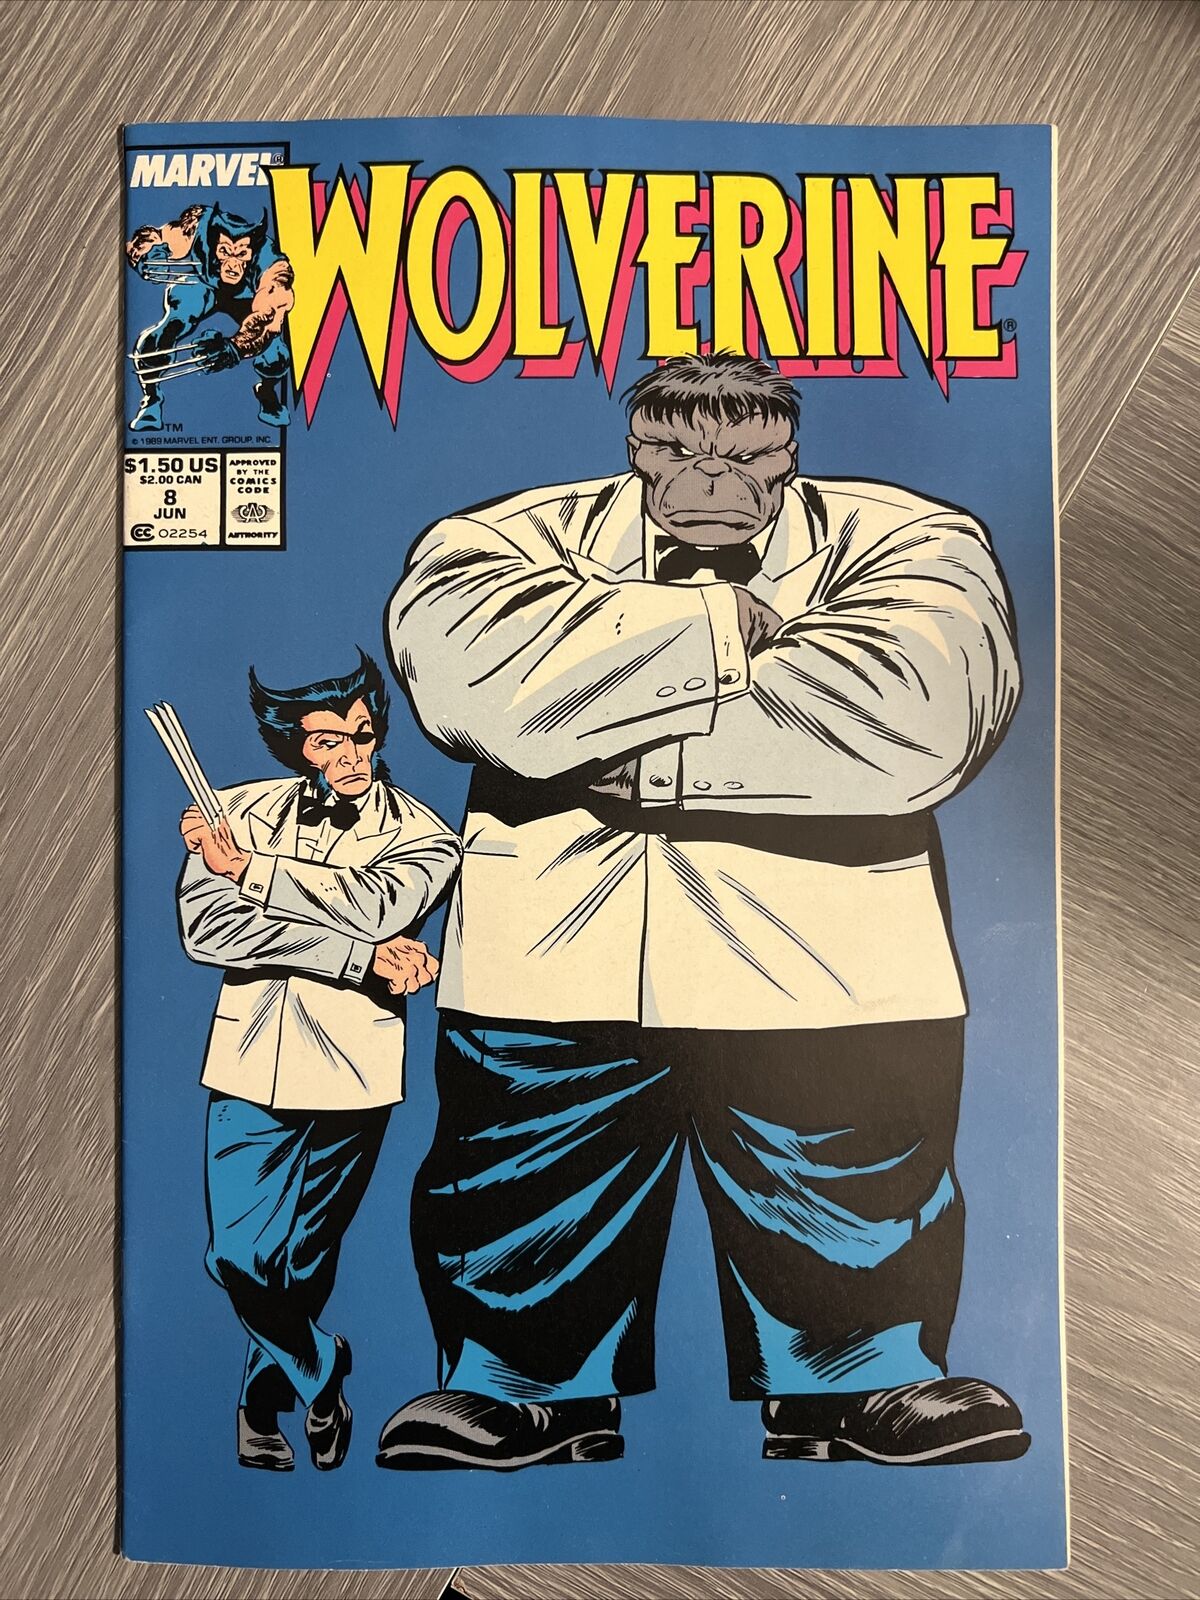 WOLVERINE #8 (Marvel, 1989) Iconic Grey Joe Fix It Hulk Cover White Pages VF/VF+